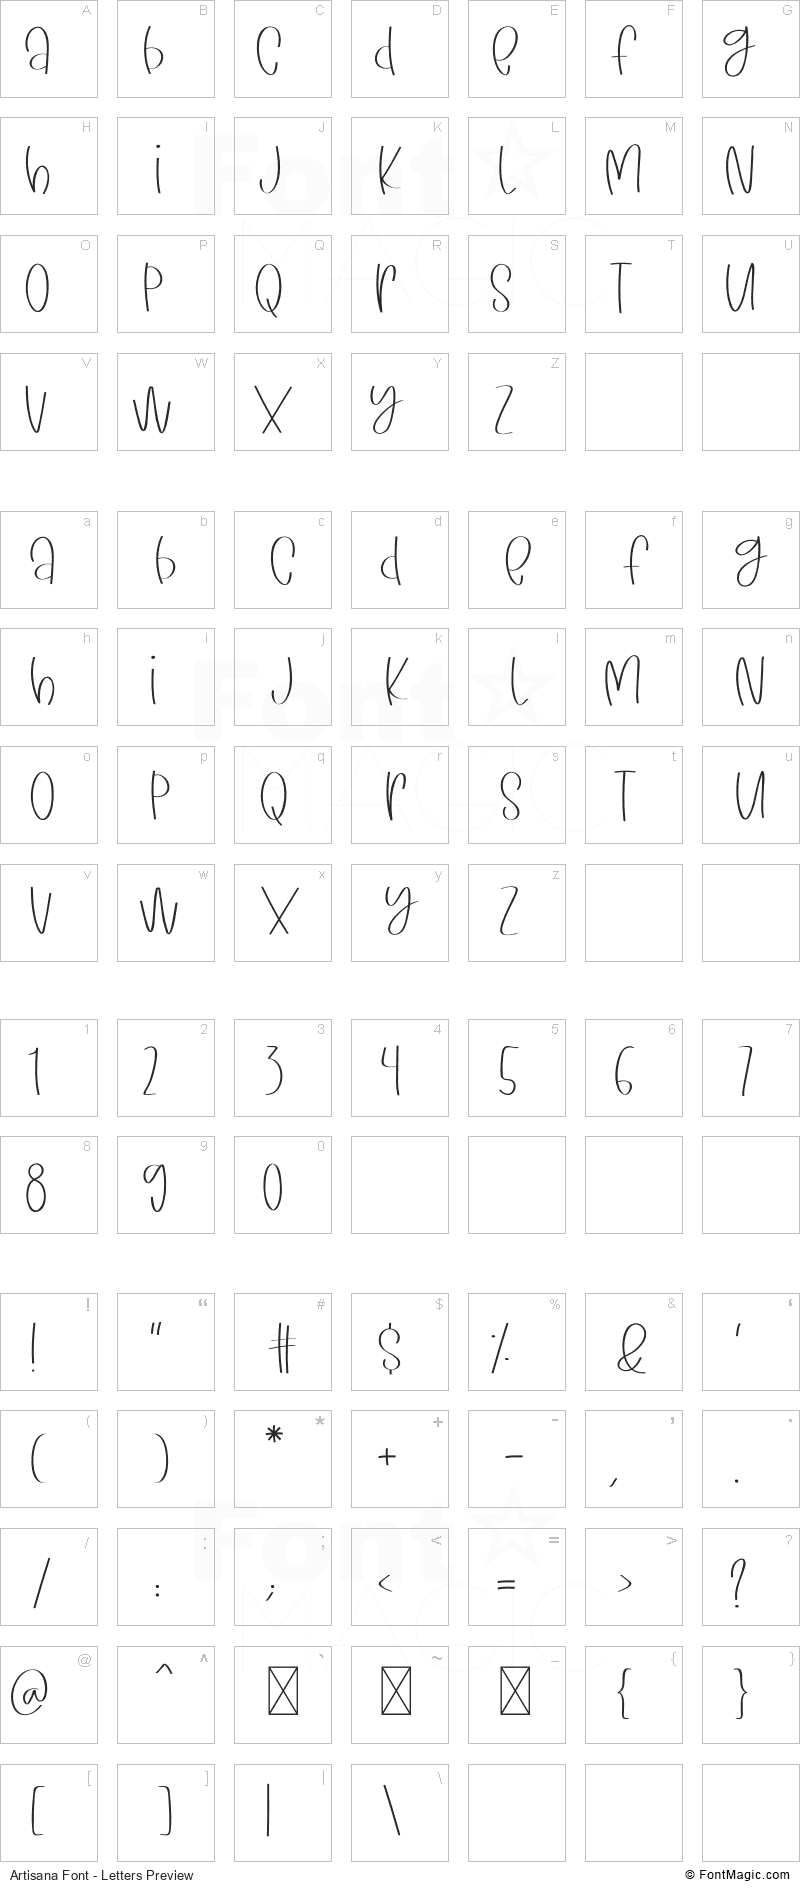 Artisana Font - All Latters Preview Chart